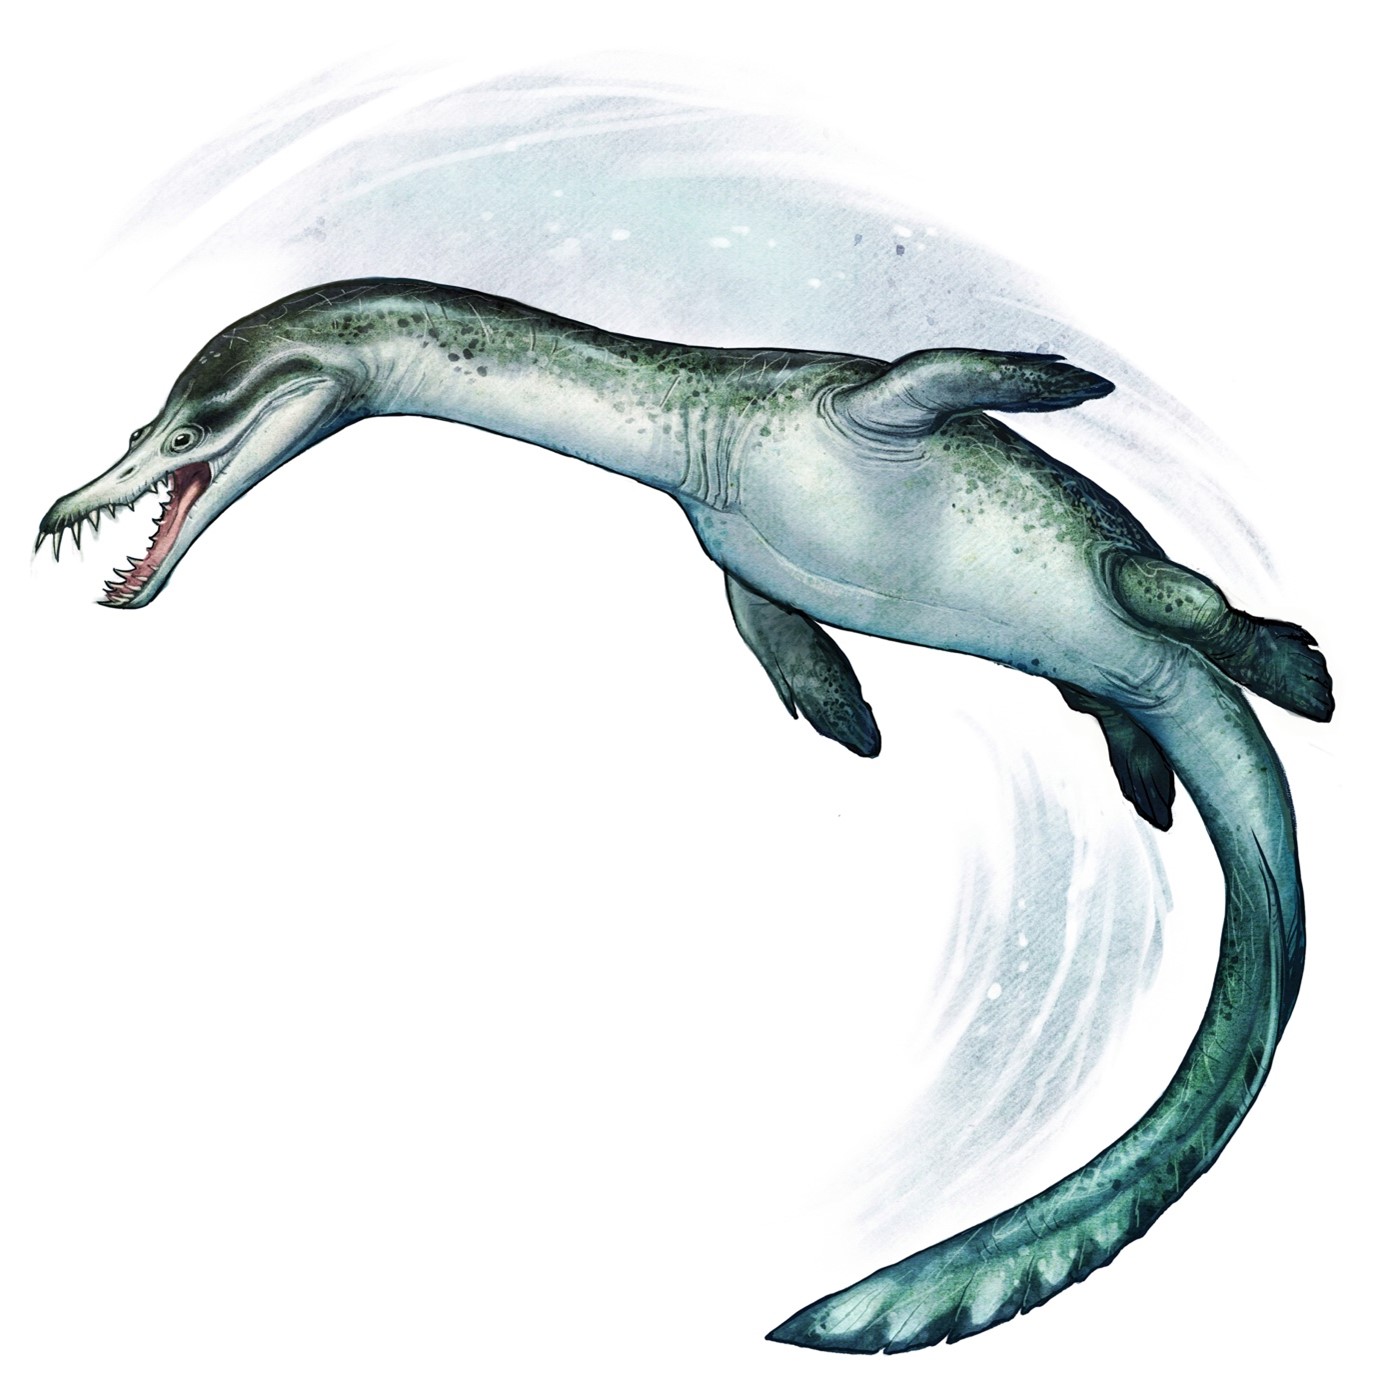 a single nothosaur with a long body and sharp pointy teeth.